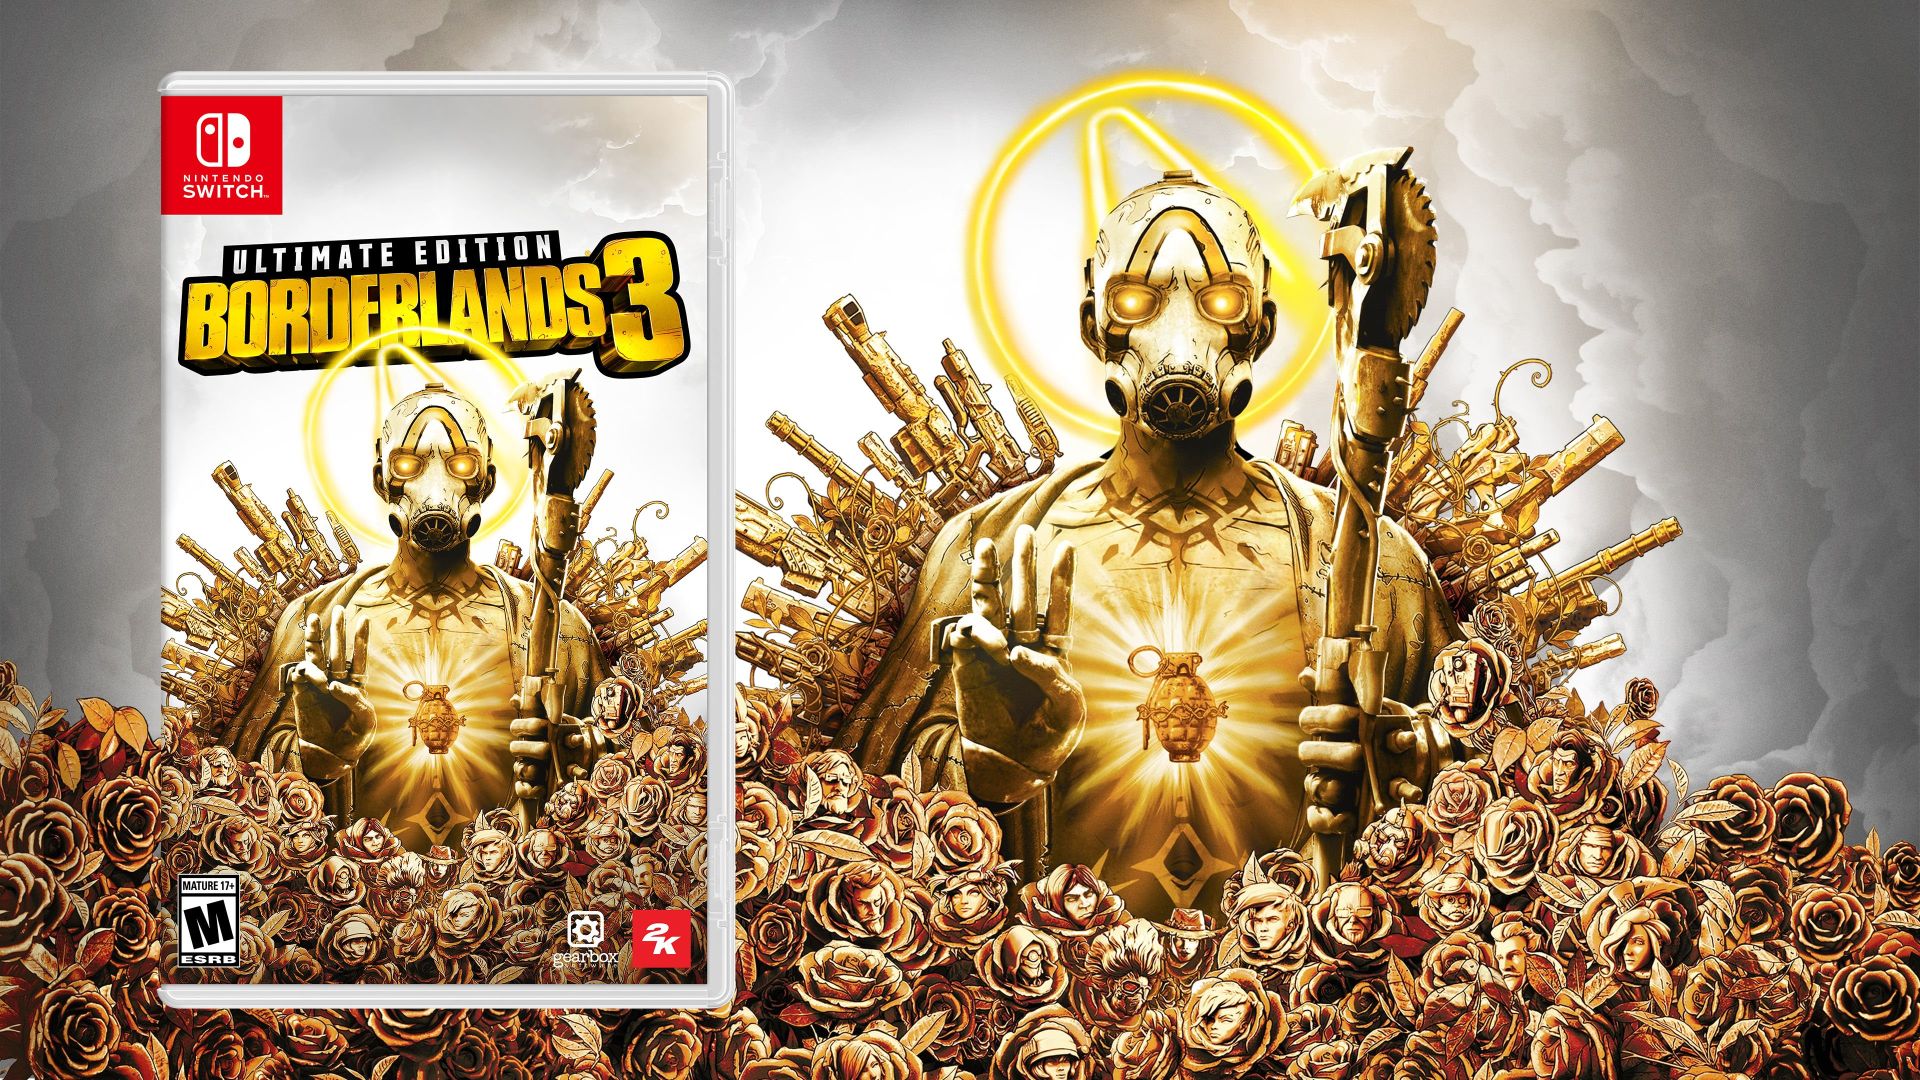 Borderlands 3 Ultimate Edition Announced for Nintendo Switch, Launches October 6th